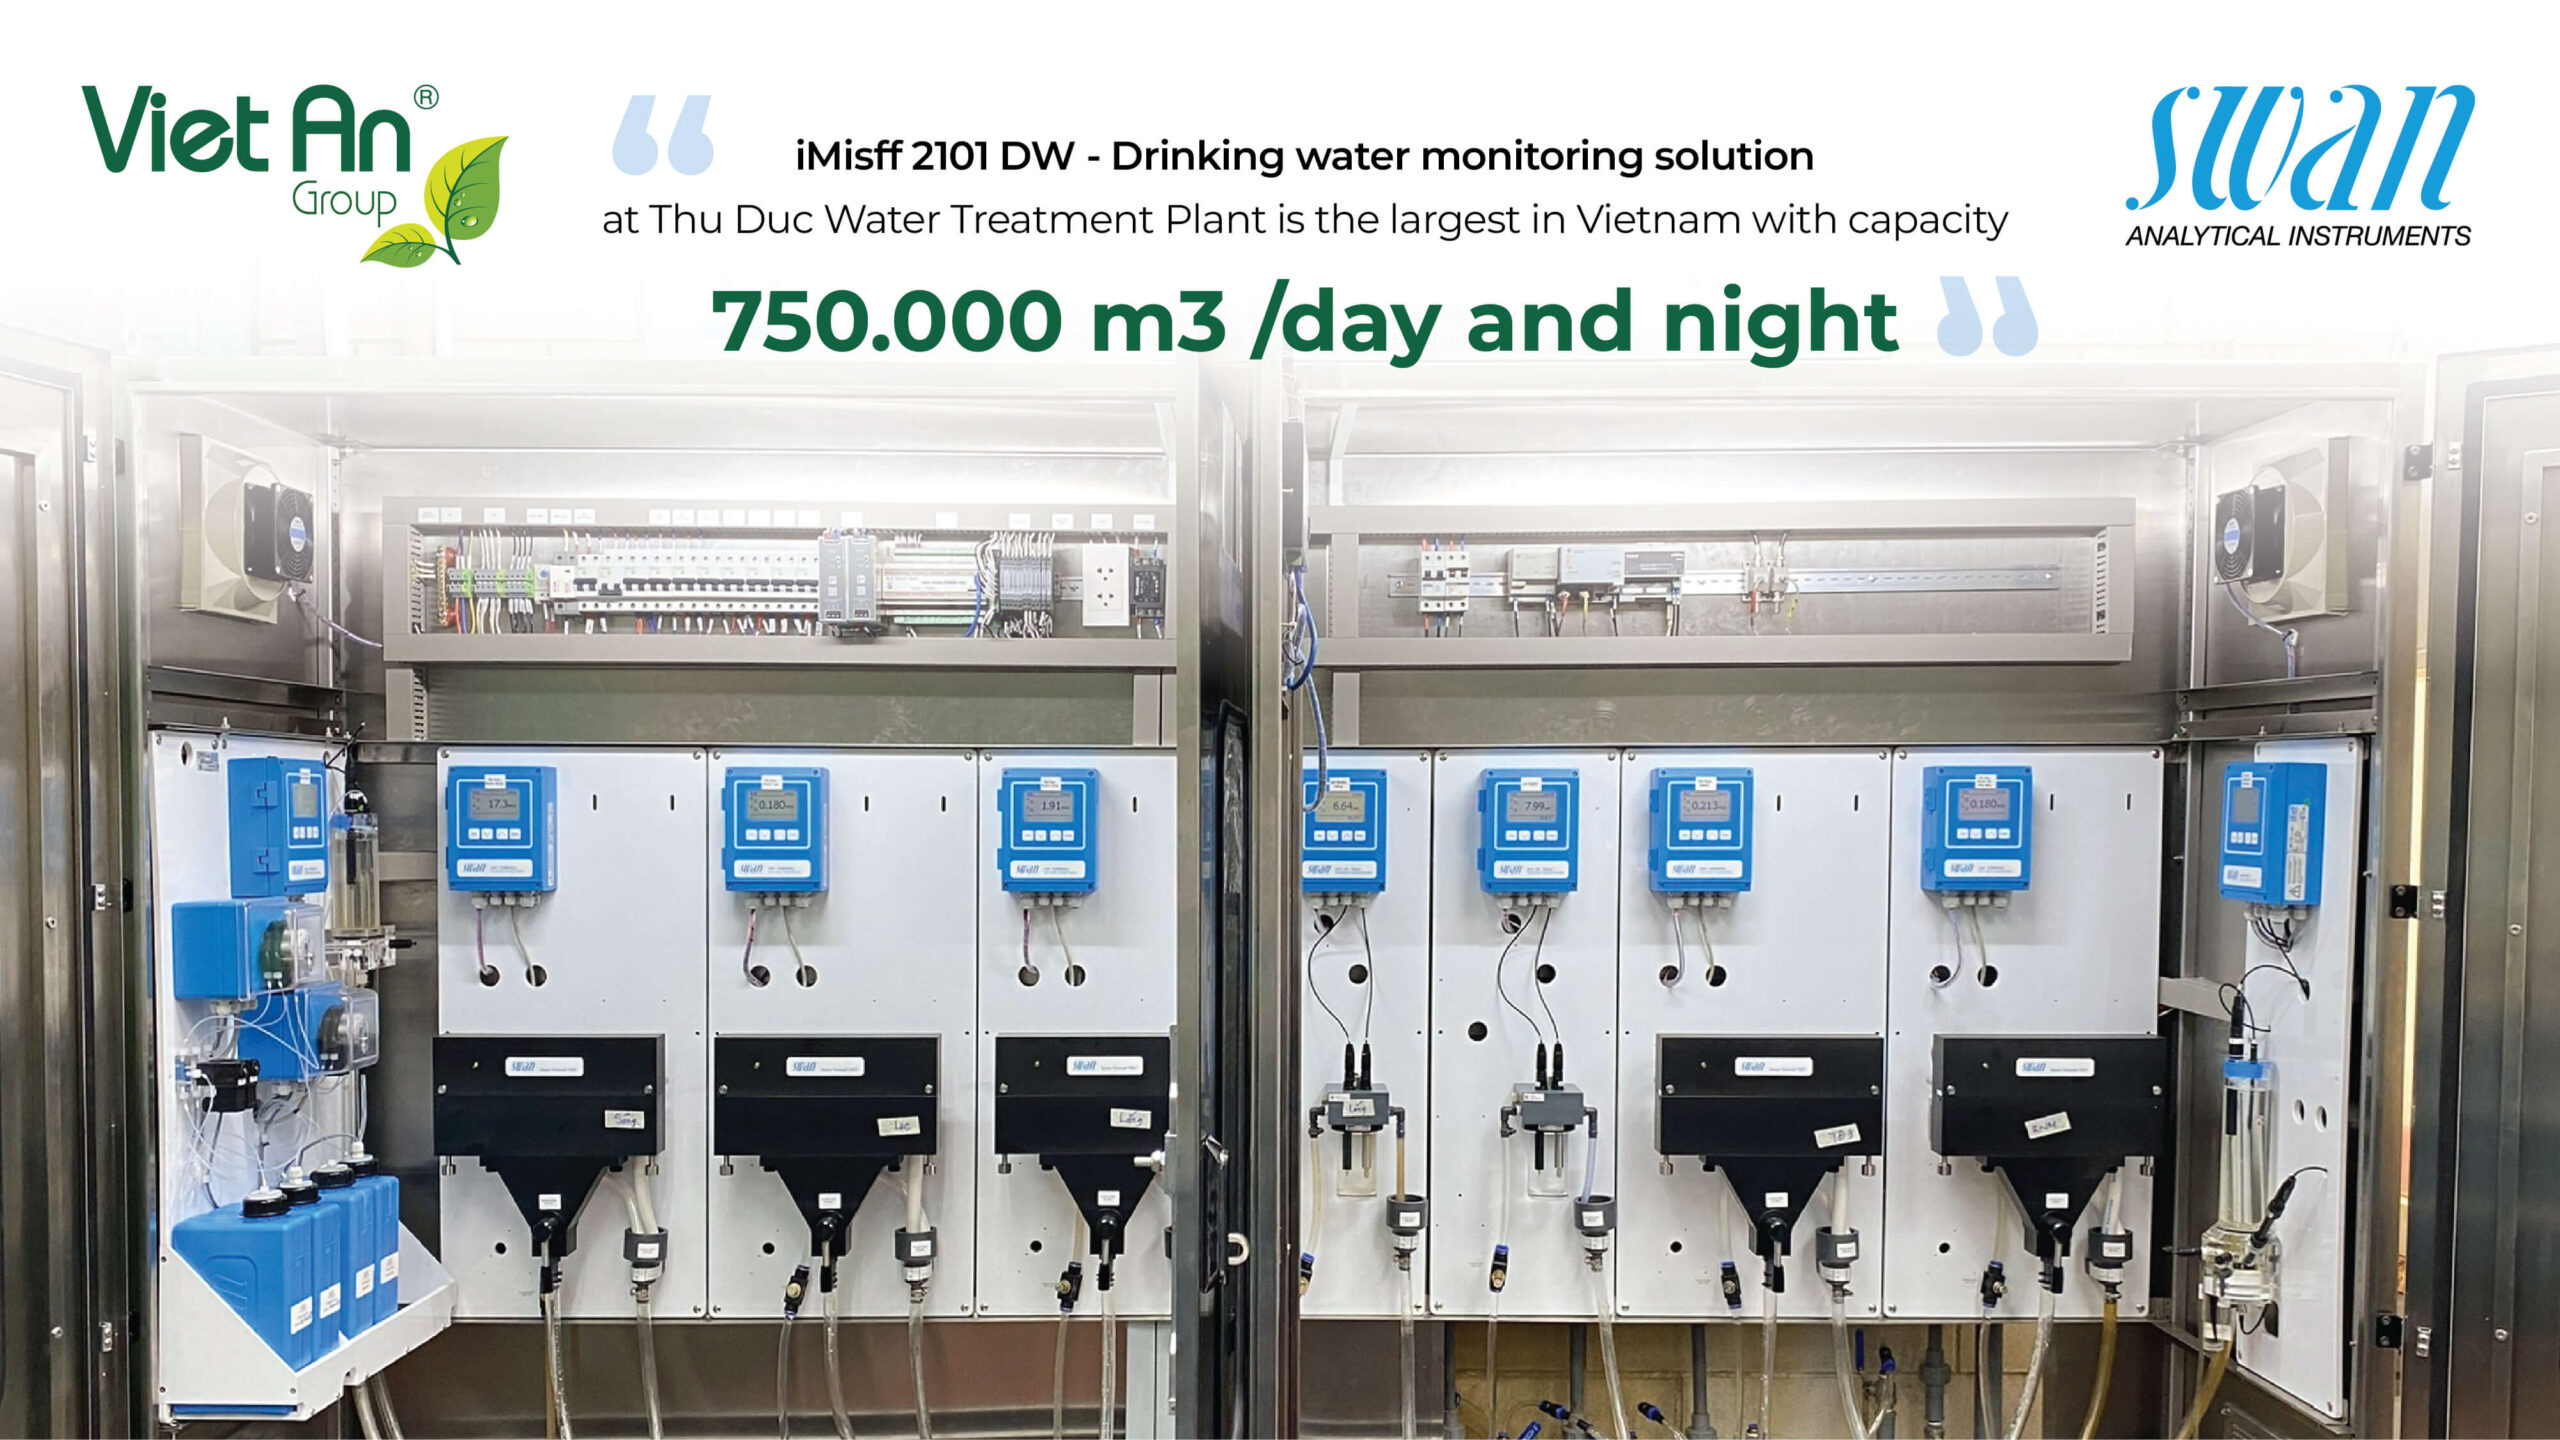 Thu Duc water supply plant applies the iMisff 2101 smart clean water monitoring system